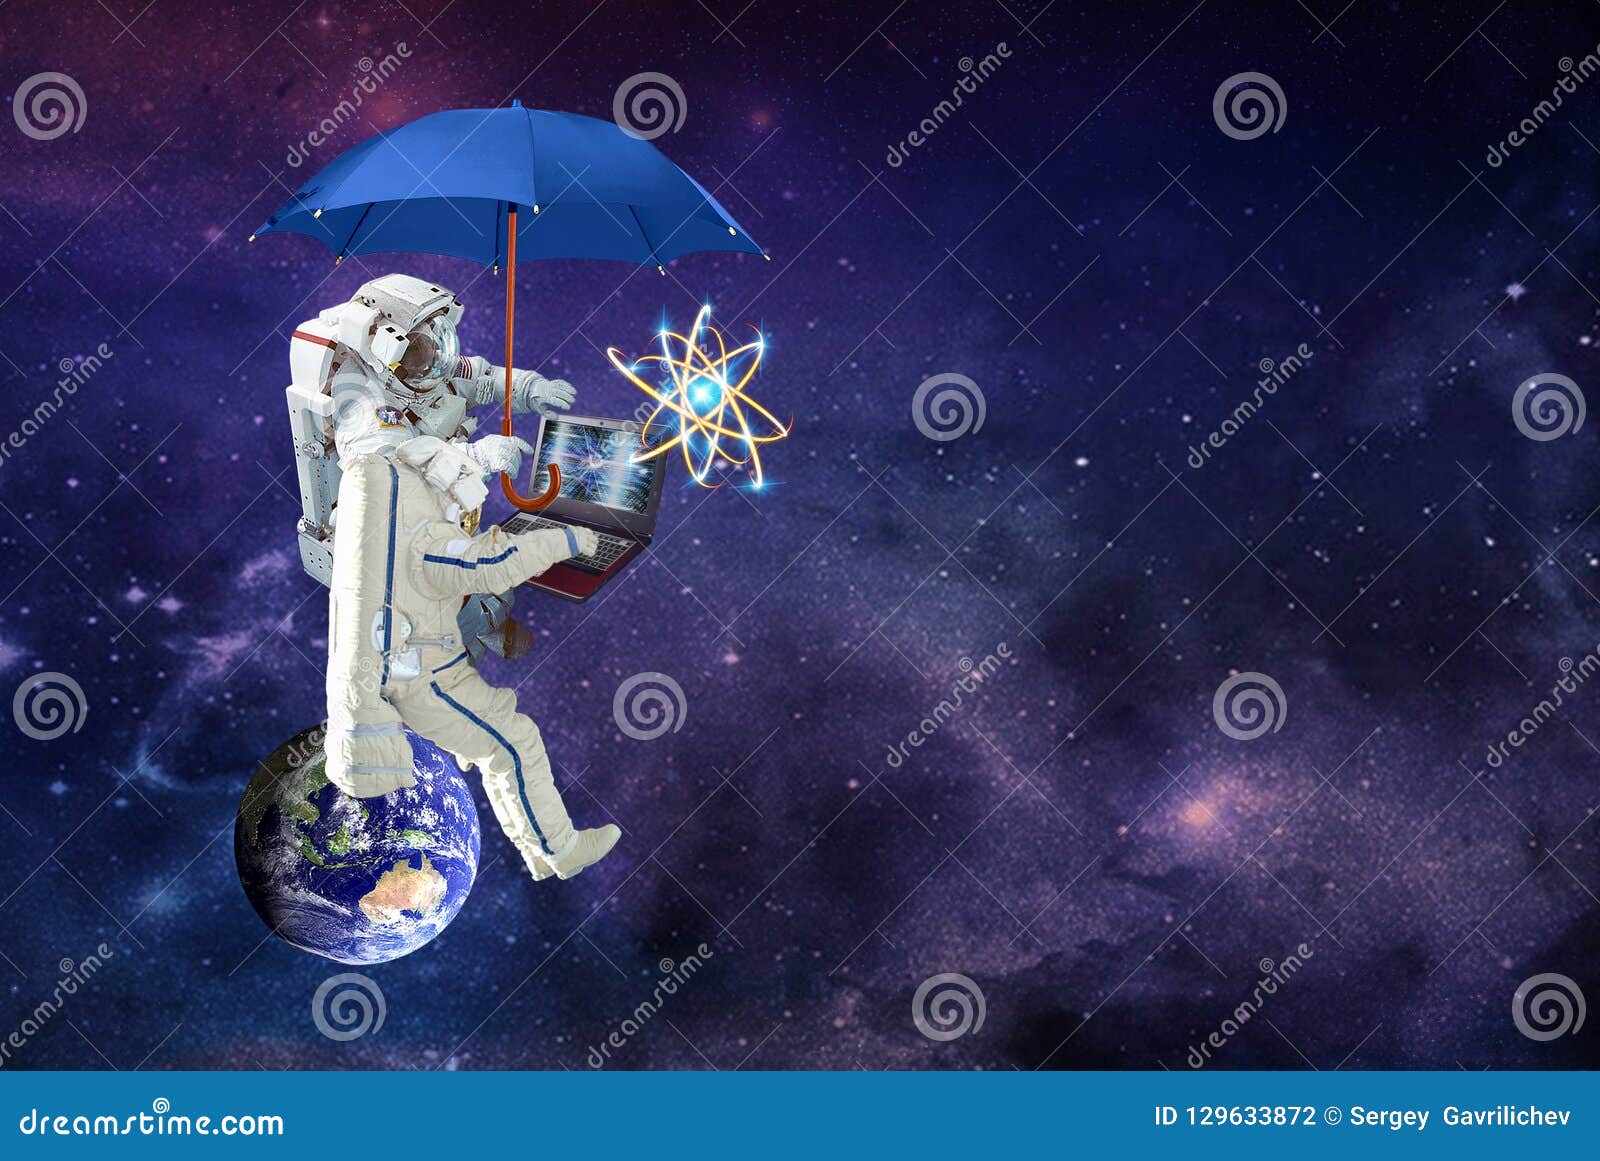 Astronaut Sitting on a Planet with Laptop Under Umbrella Spaceman Stock